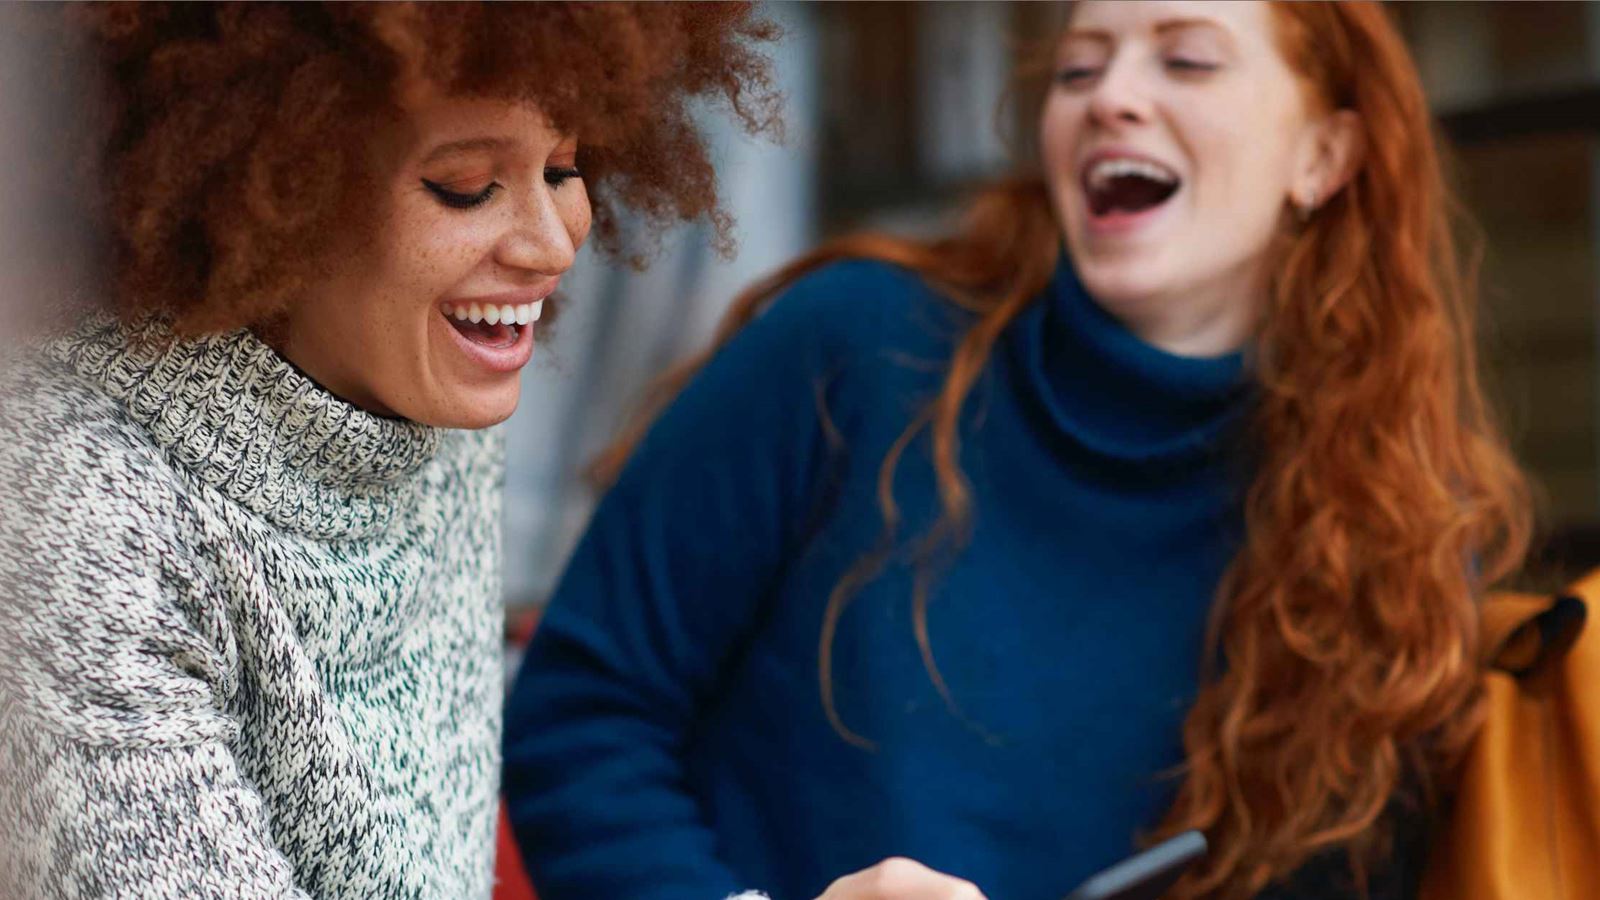 Two women laughing while one of them looks at her phone